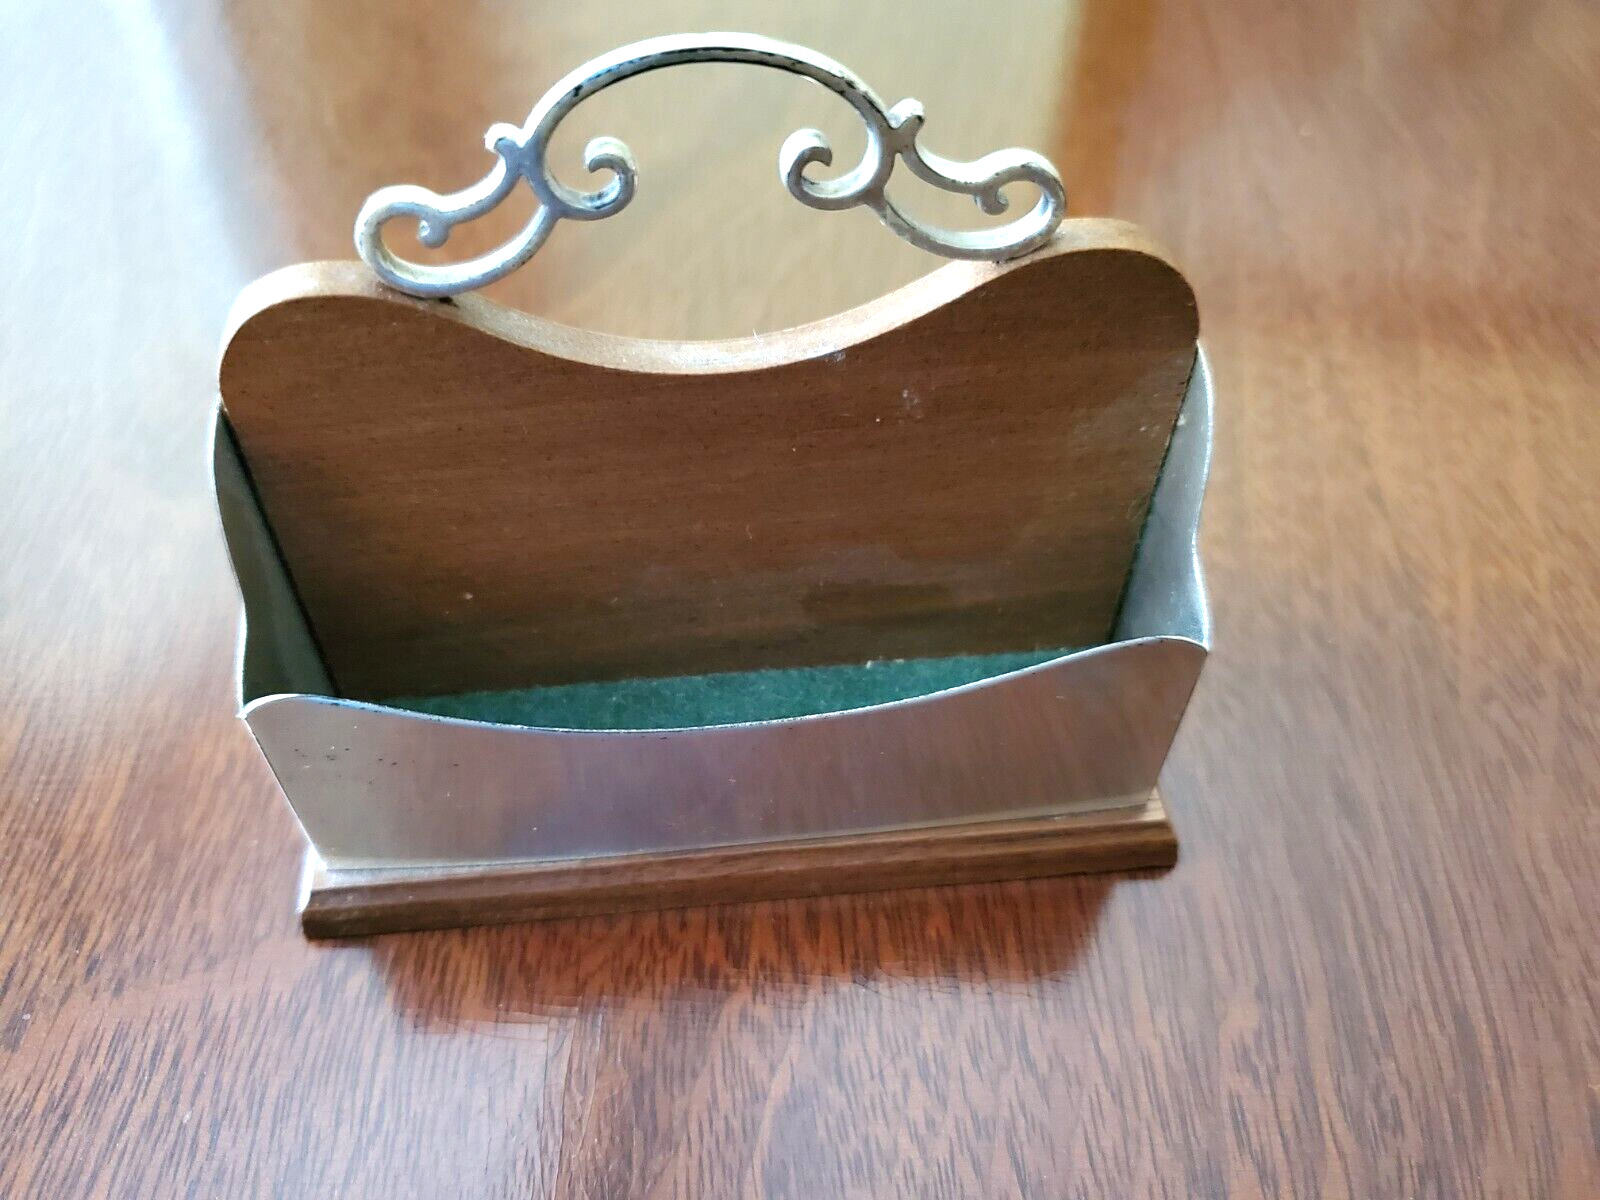 Cartier Business Card Holder Sterling Silver Gorham Vintage  Father's Day Gift